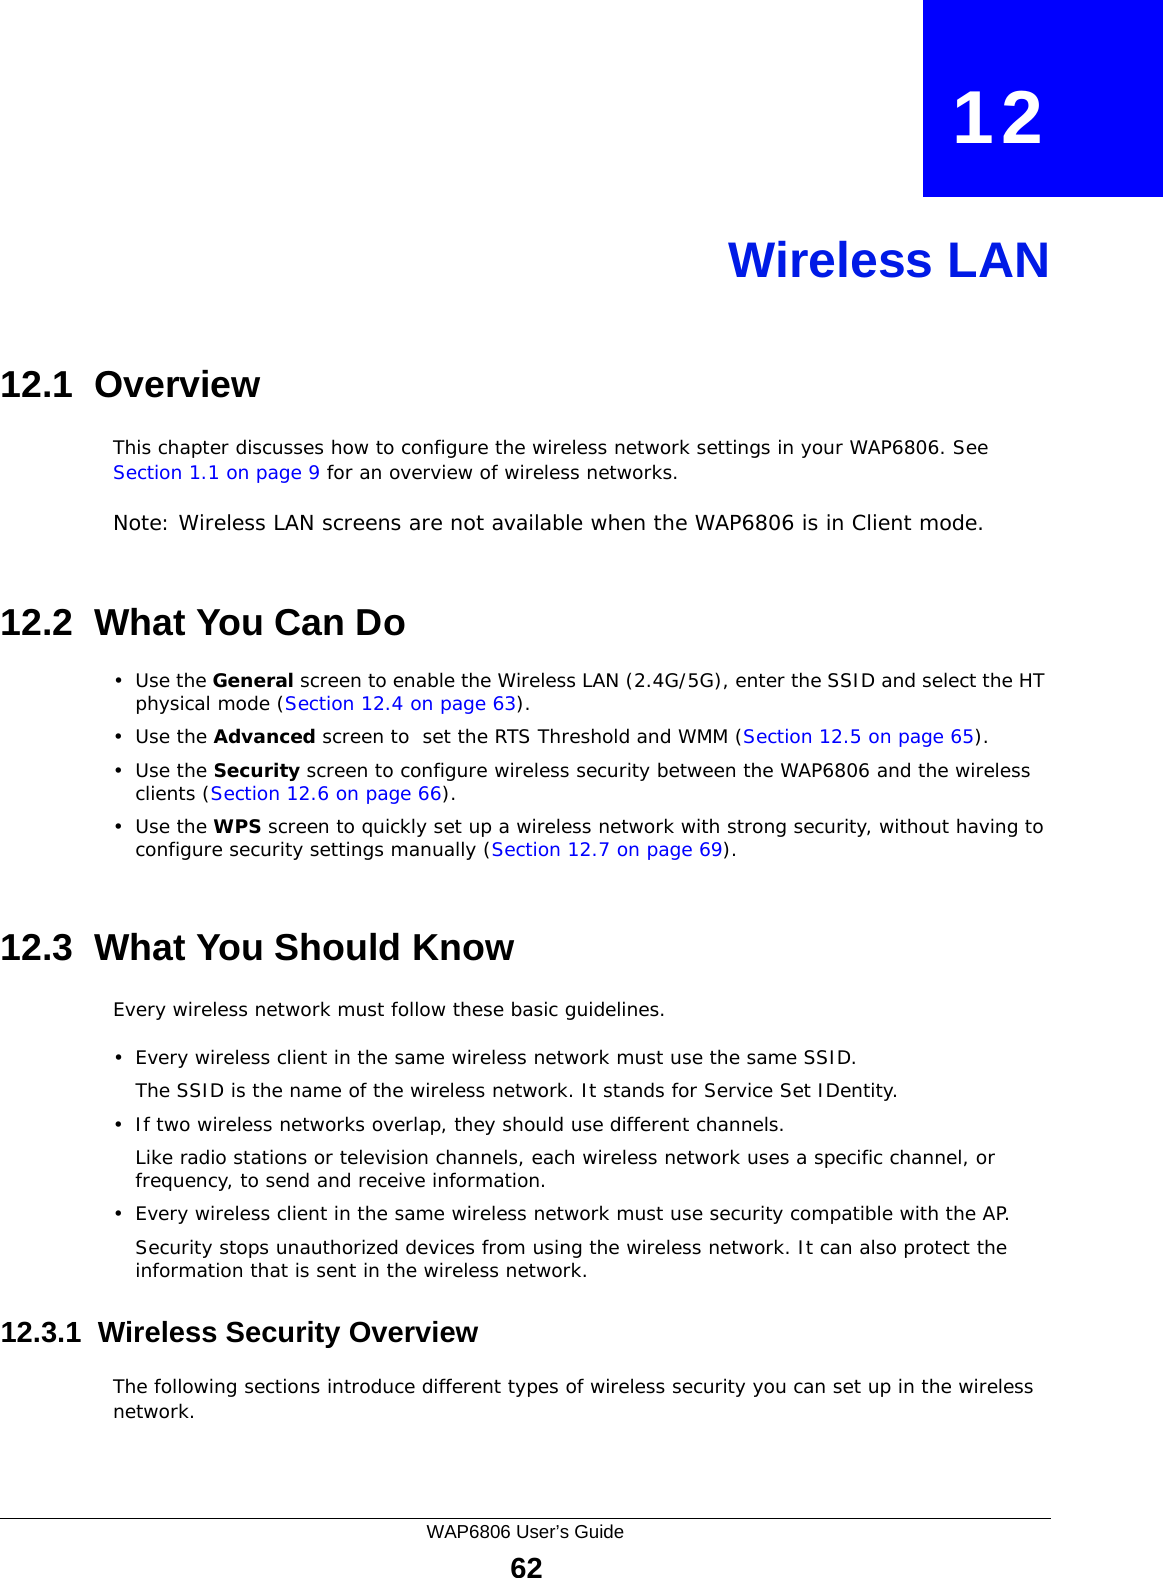 WAP6806 User’s Guide62CHAPTER   12Wireless LAN12.1  OverviewThis chapter discusses how to configure the wireless network settings in your WAP6806. See Section 1.1 on page 9 for an overview of wireless networks.Note: Wireless LAN screens are not available when the WAP6806 is in Client mode.12.2  What You Can Do•Use the General screen to enable the Wireless LAN (2.4G/5G), enter the SSID and select the HT physical mode (Section 12.4 on page 63).•Use the Advanced screen to  set the RTS Threshold and WMM (Section 12.5 on page 65).•Use the Security screen to configure wireless security between the WAP6806 and the wireless clients (Section 12.6 on page 66).•Use the WPS screen to quickly set up a wireless network with strong security, without having to configure security settings manually (Section 12.7 on page 69).12.3  What You Should KnowEvery wireless network must follow these basic guidelines.• Every wireless client in the same wireless network must use the same SSID.The SSID is the name of the wireless network. It stands for Service Set IDentity.• If two wireless networks overlap, they should use different channels.Like radio stations or television channels, each wireless network uses a specific channel, or frequency, to send and receive information.• Every wireless client in the same wireless network must use security compatible with the AP.Security stops unauthorized devices from using the wireless network. It can also protect the information that is sent in the wireless network.12.3.1  Wireless Security OverviewThe following sections introduce different types of wireless security you can set up in the wireless network.